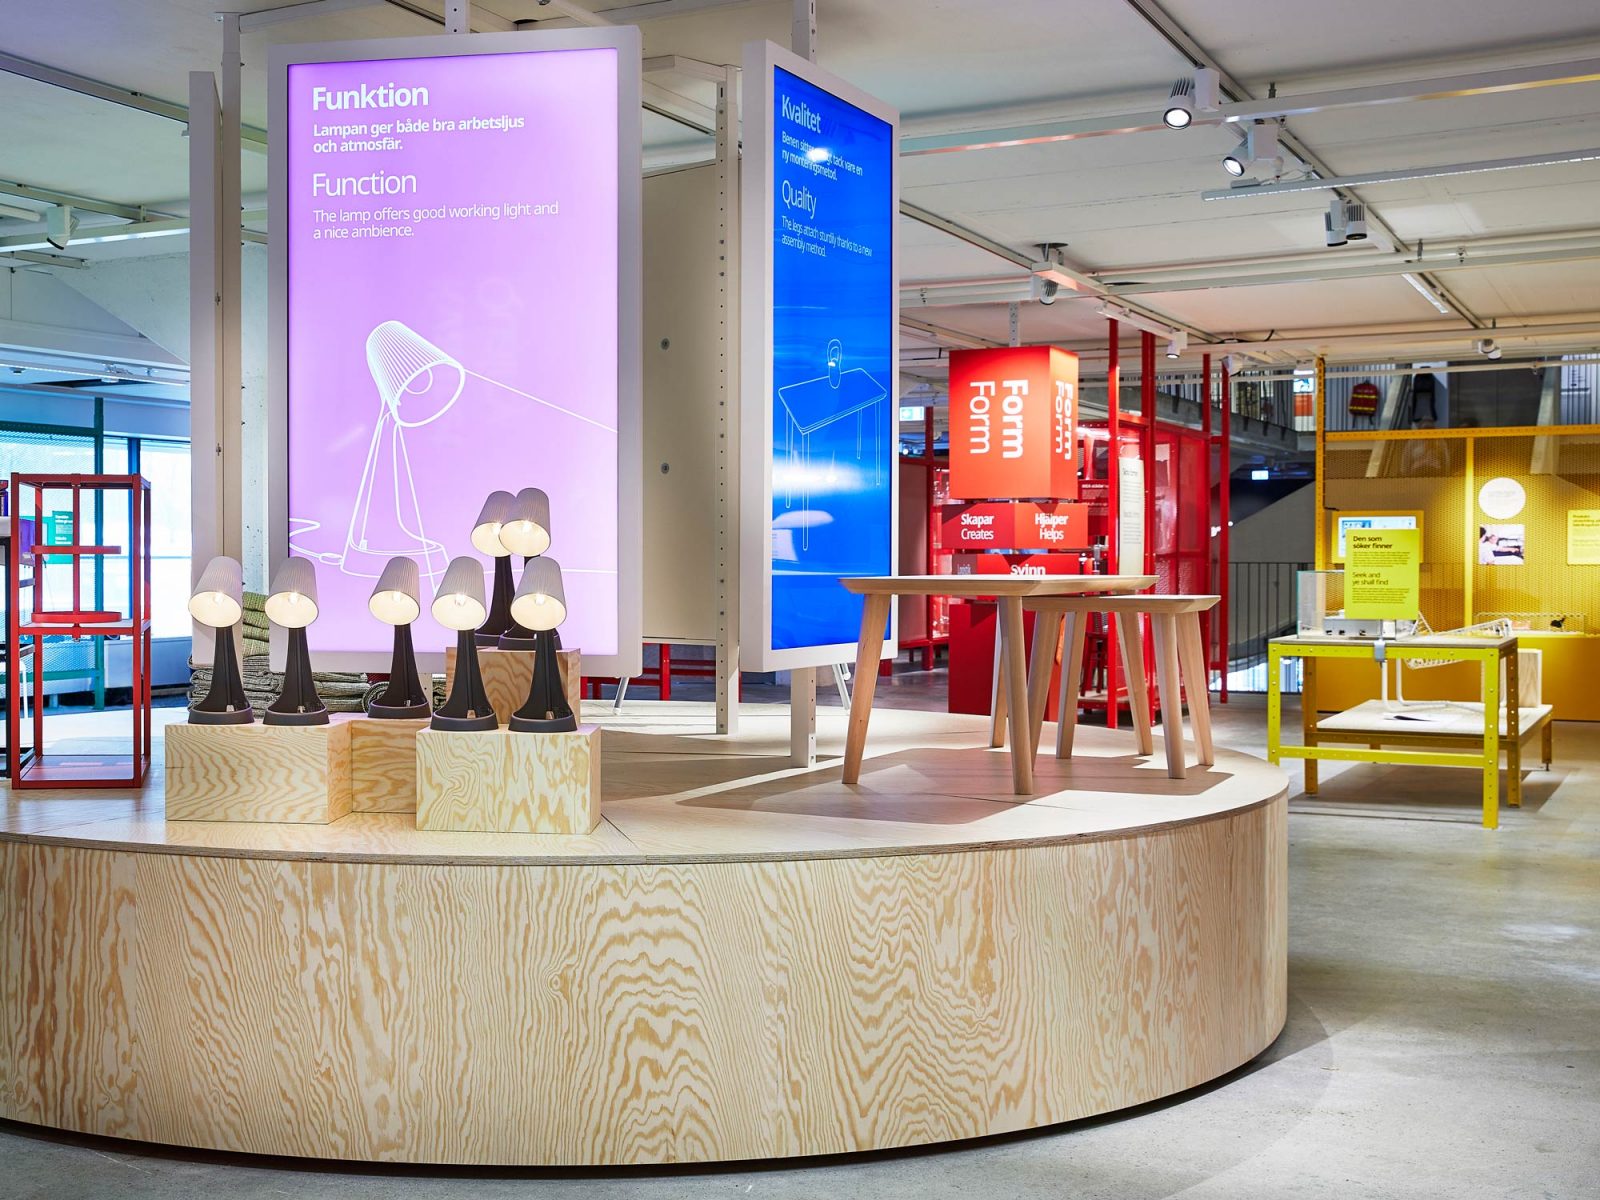 Part of Democratic Design exhibit – light boards in purple and blue with white text behind lamps on wooden boxes and tables.